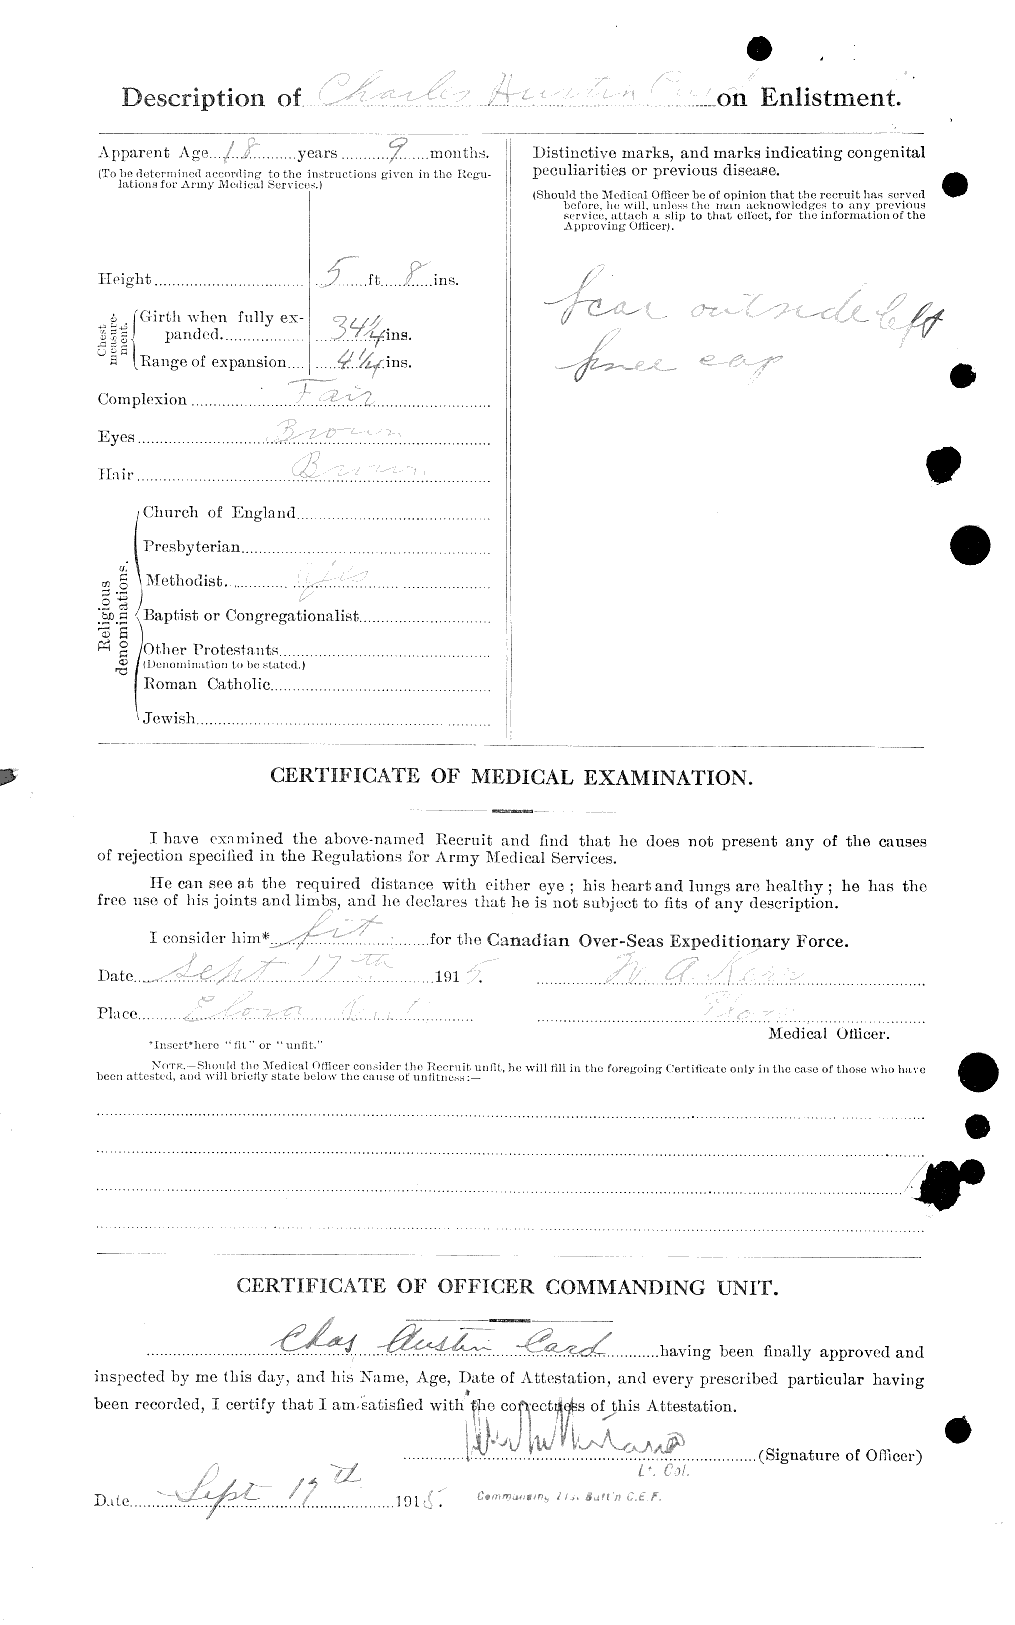 Personnel Records of the First World War - CEF 003070b